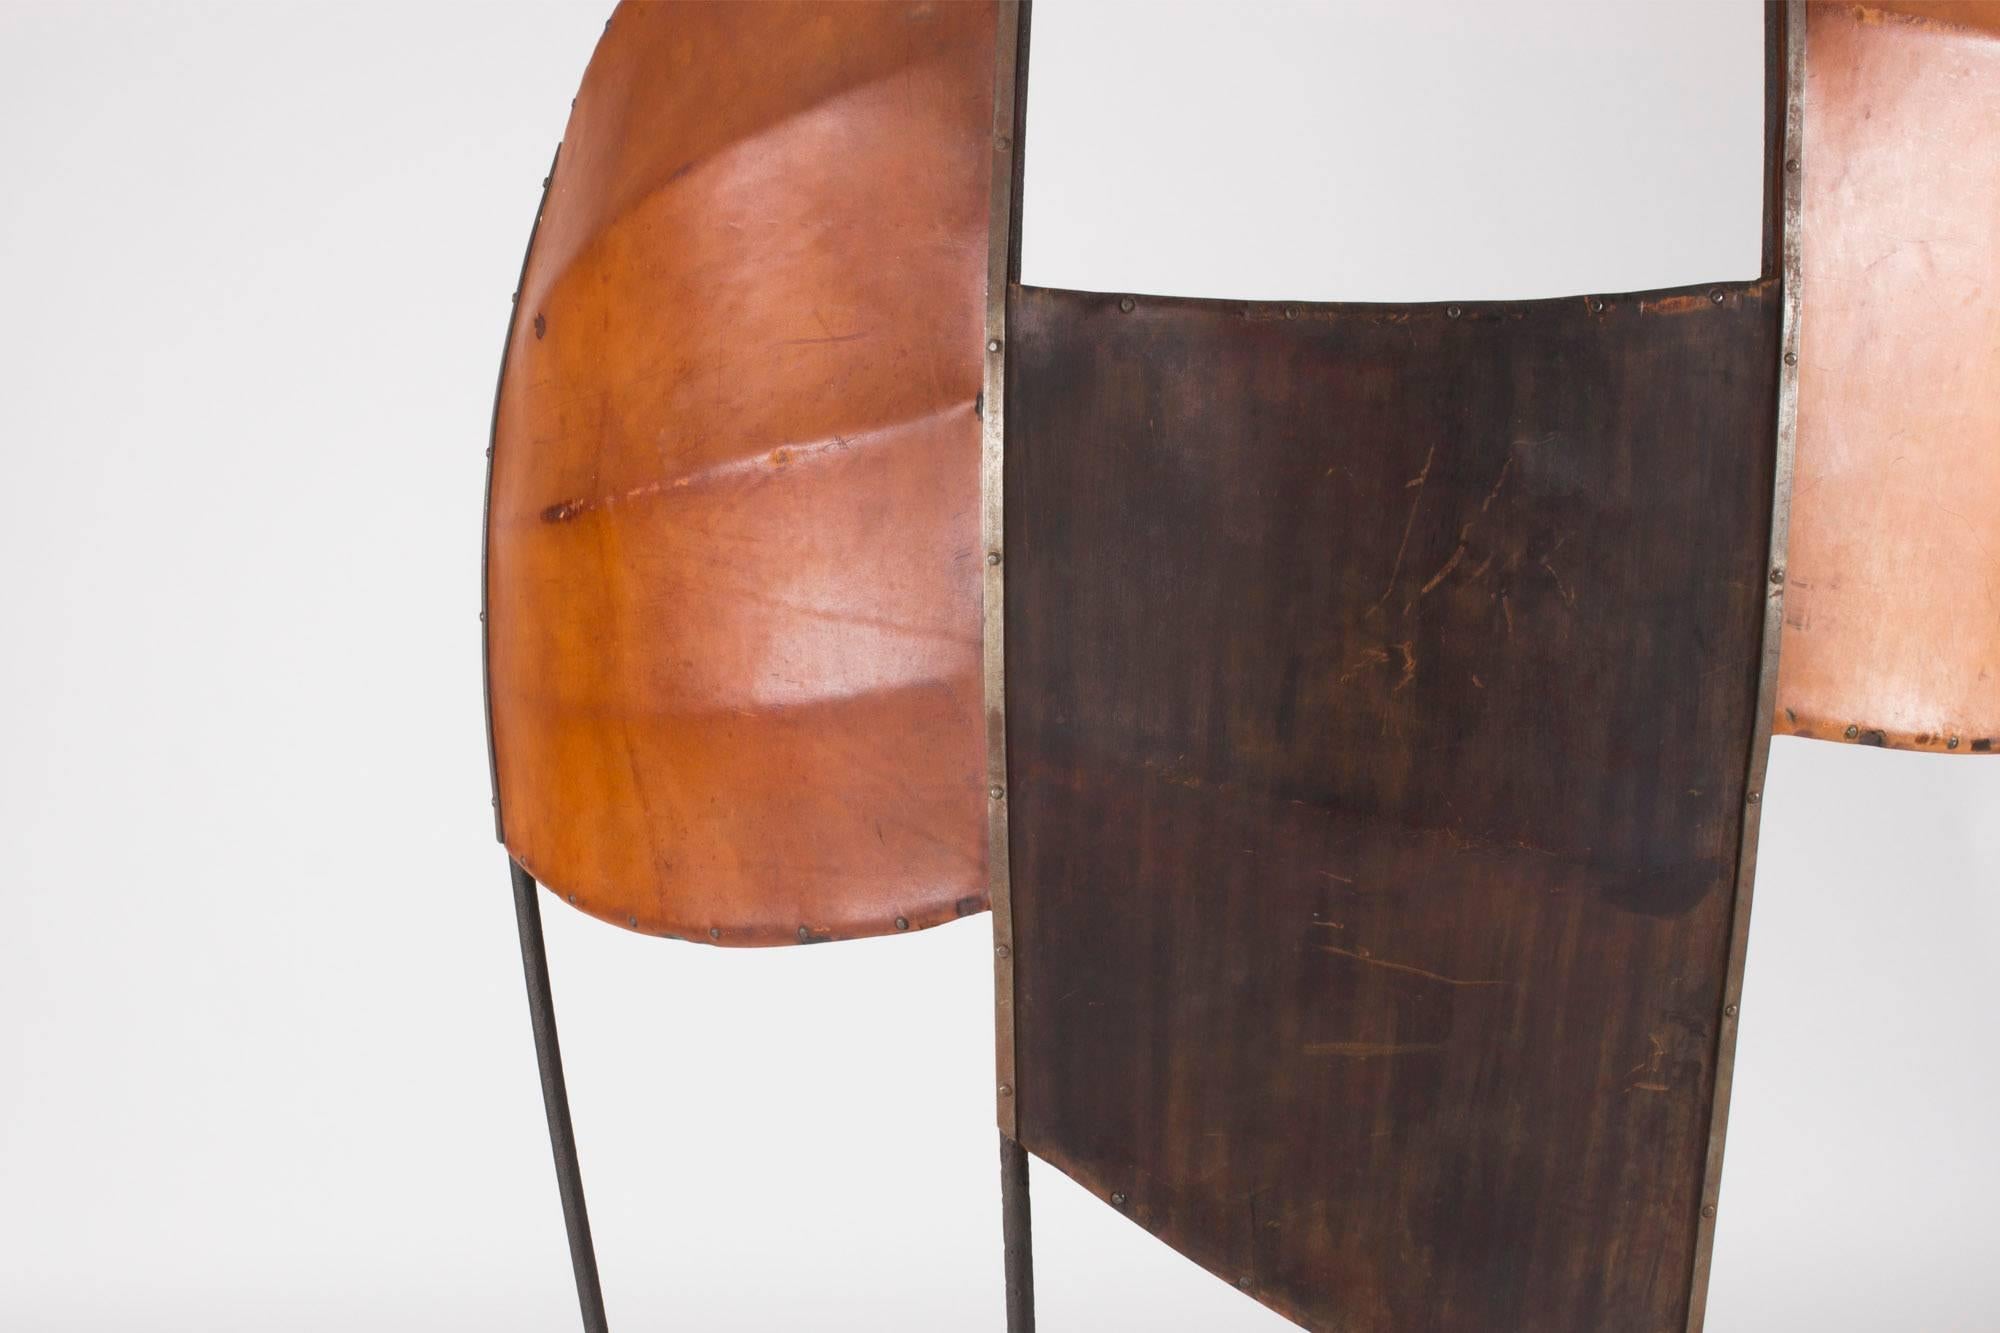 Spectacular sculptural room divider by Fred Leyman, custom-made for Majorna Library in Gothenburg in 1963. This piece is one of four that are each unique, made from wrought iron and hardened leather. The room dividers were granted substantial public